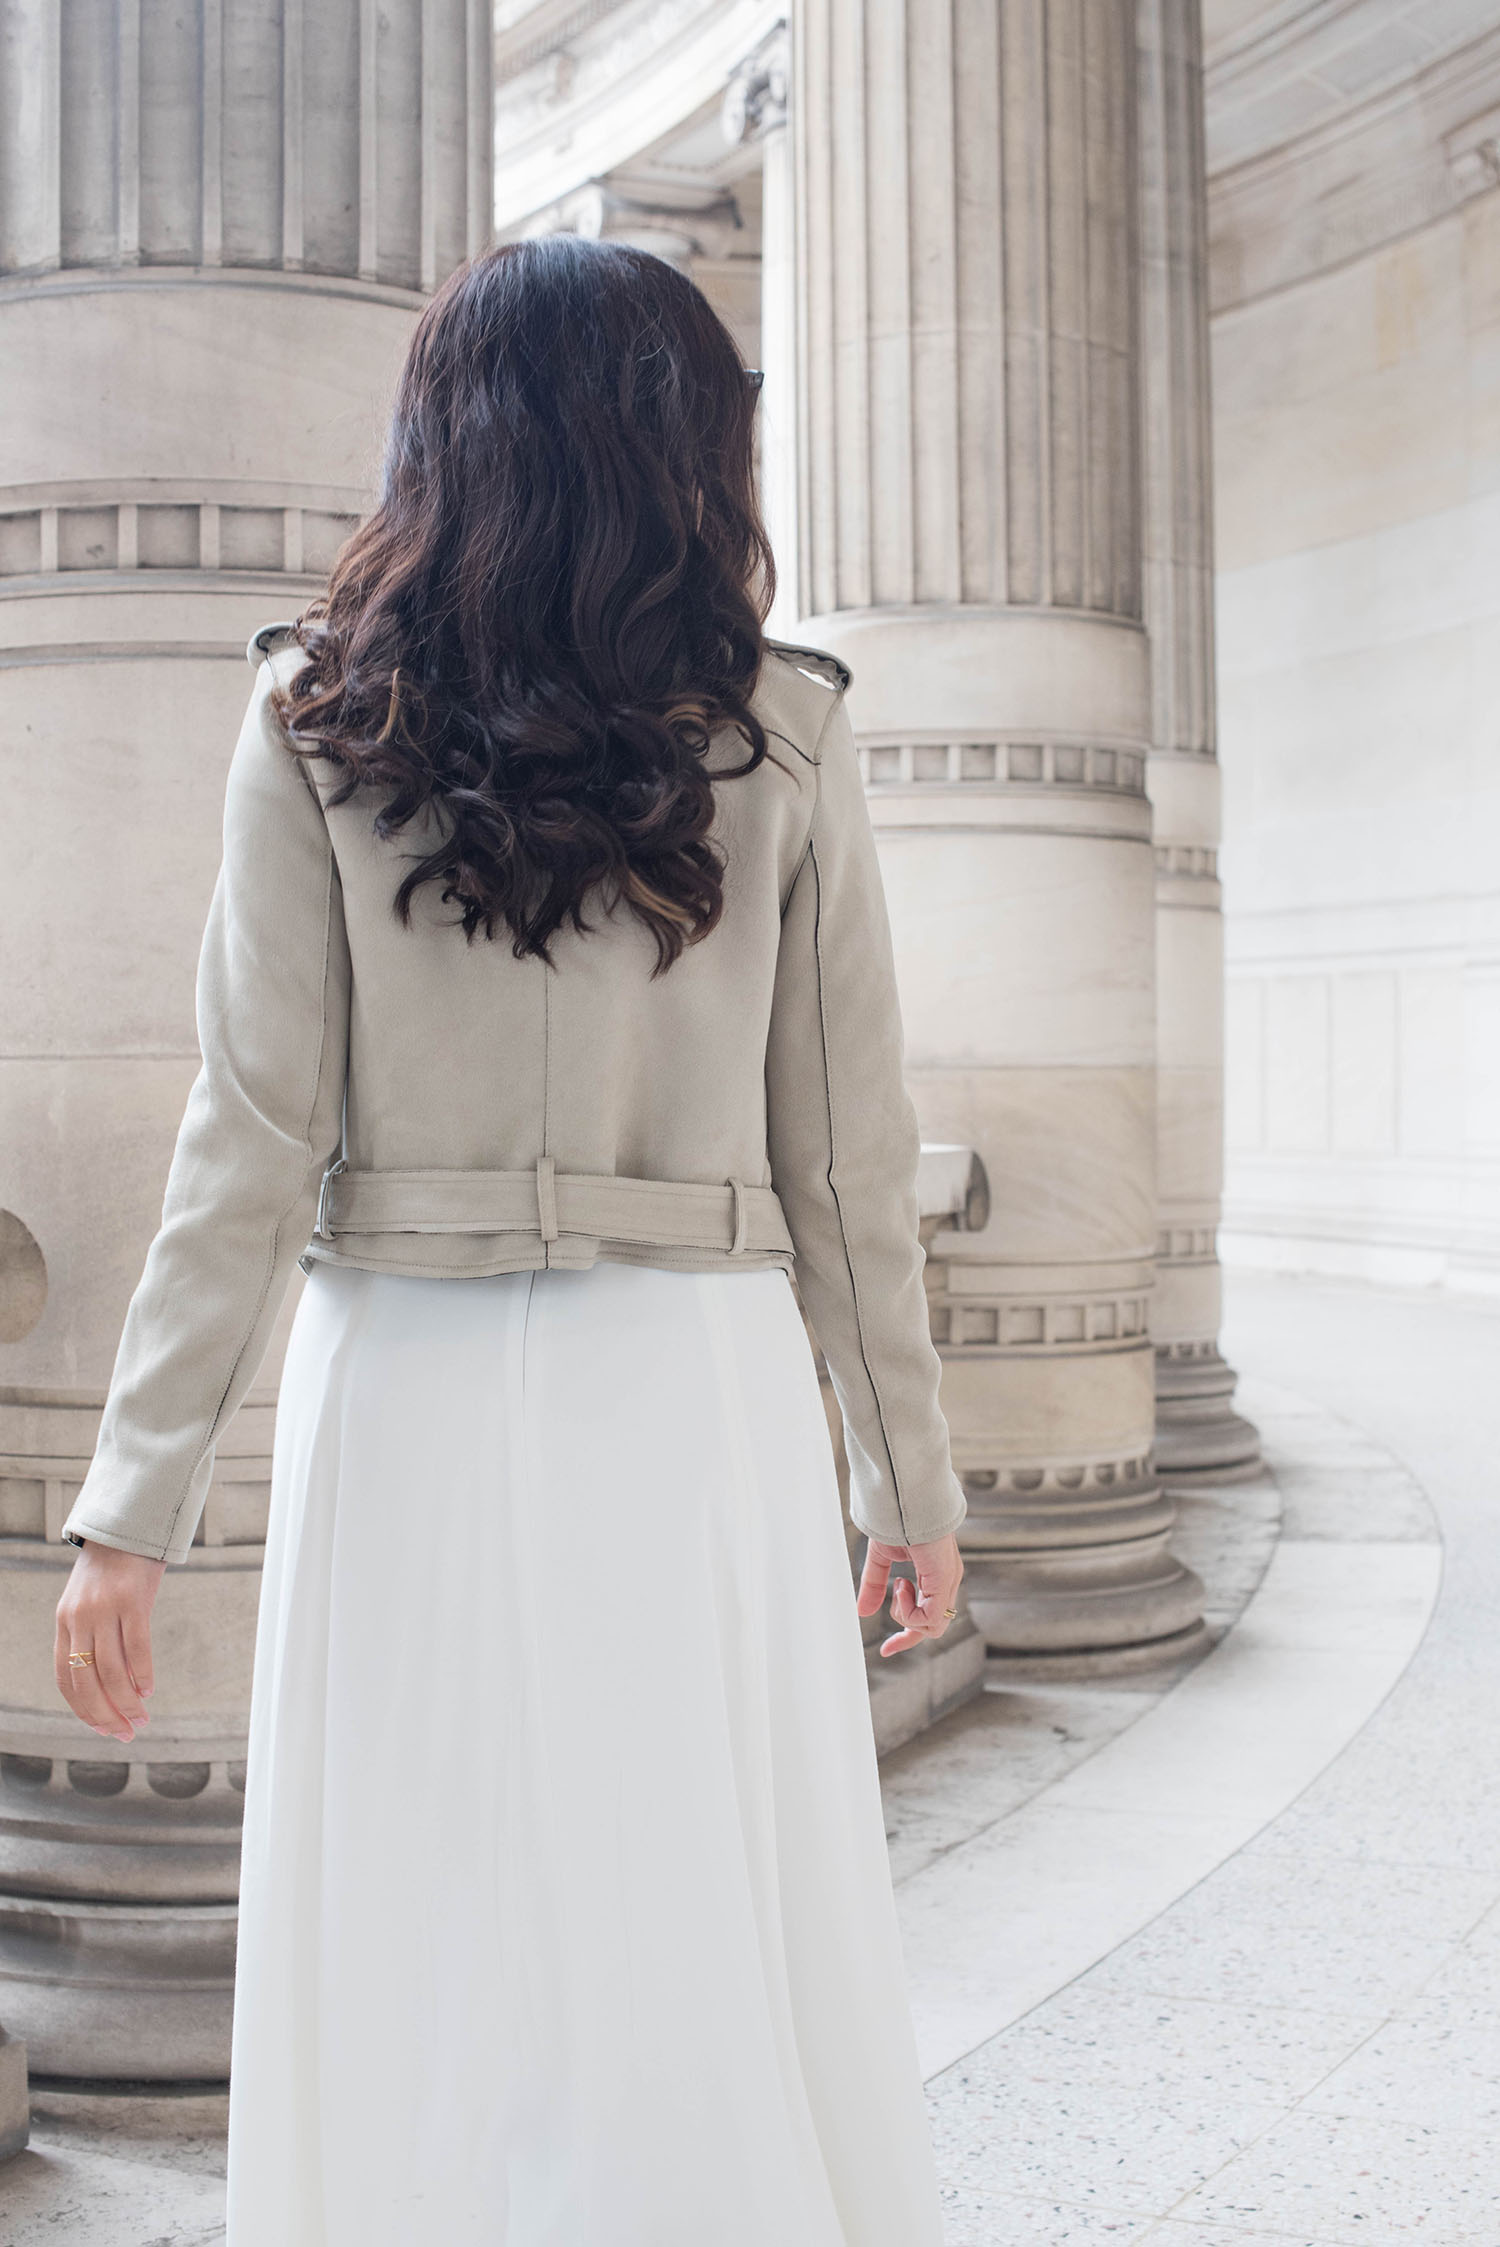 Outfit details on Canadian fashion blogger Cee Fardoe of Coco & Vera at the Palais Galliera in Paris, featuring a white Ivy & Oak dress and Zara beige jacket